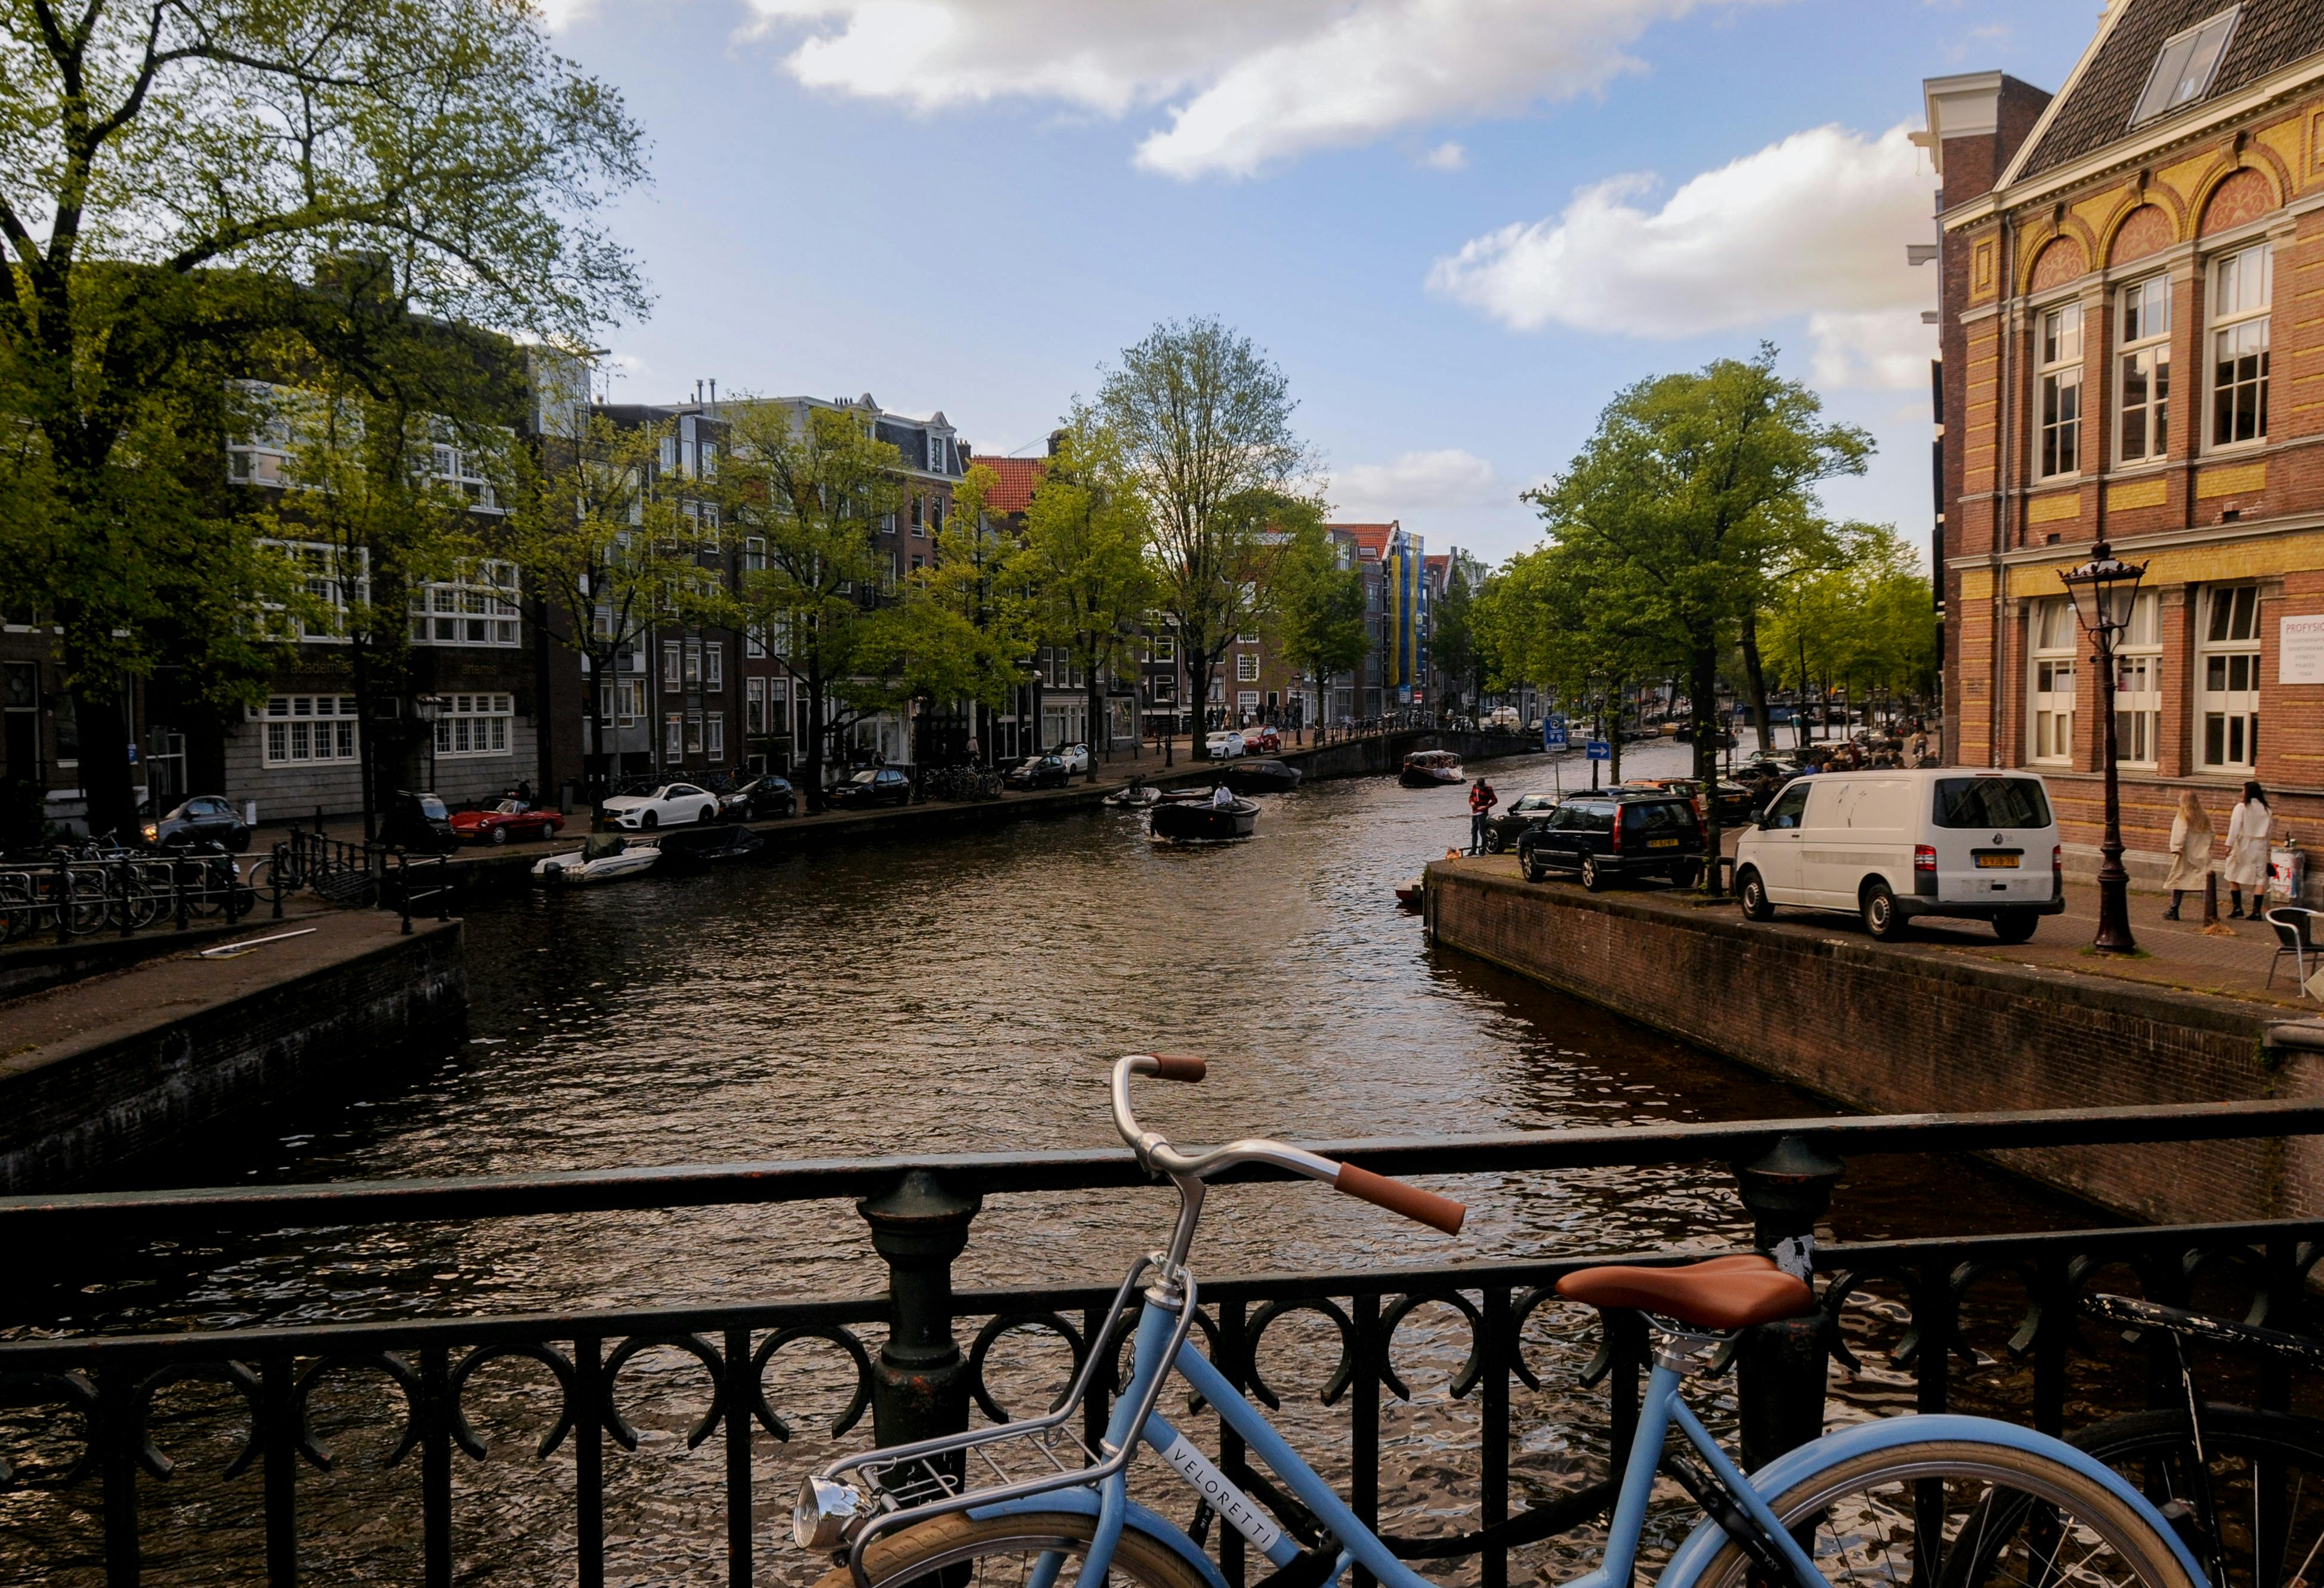 Cycling in Amsterdam: Essential Tips for Renting Bikes